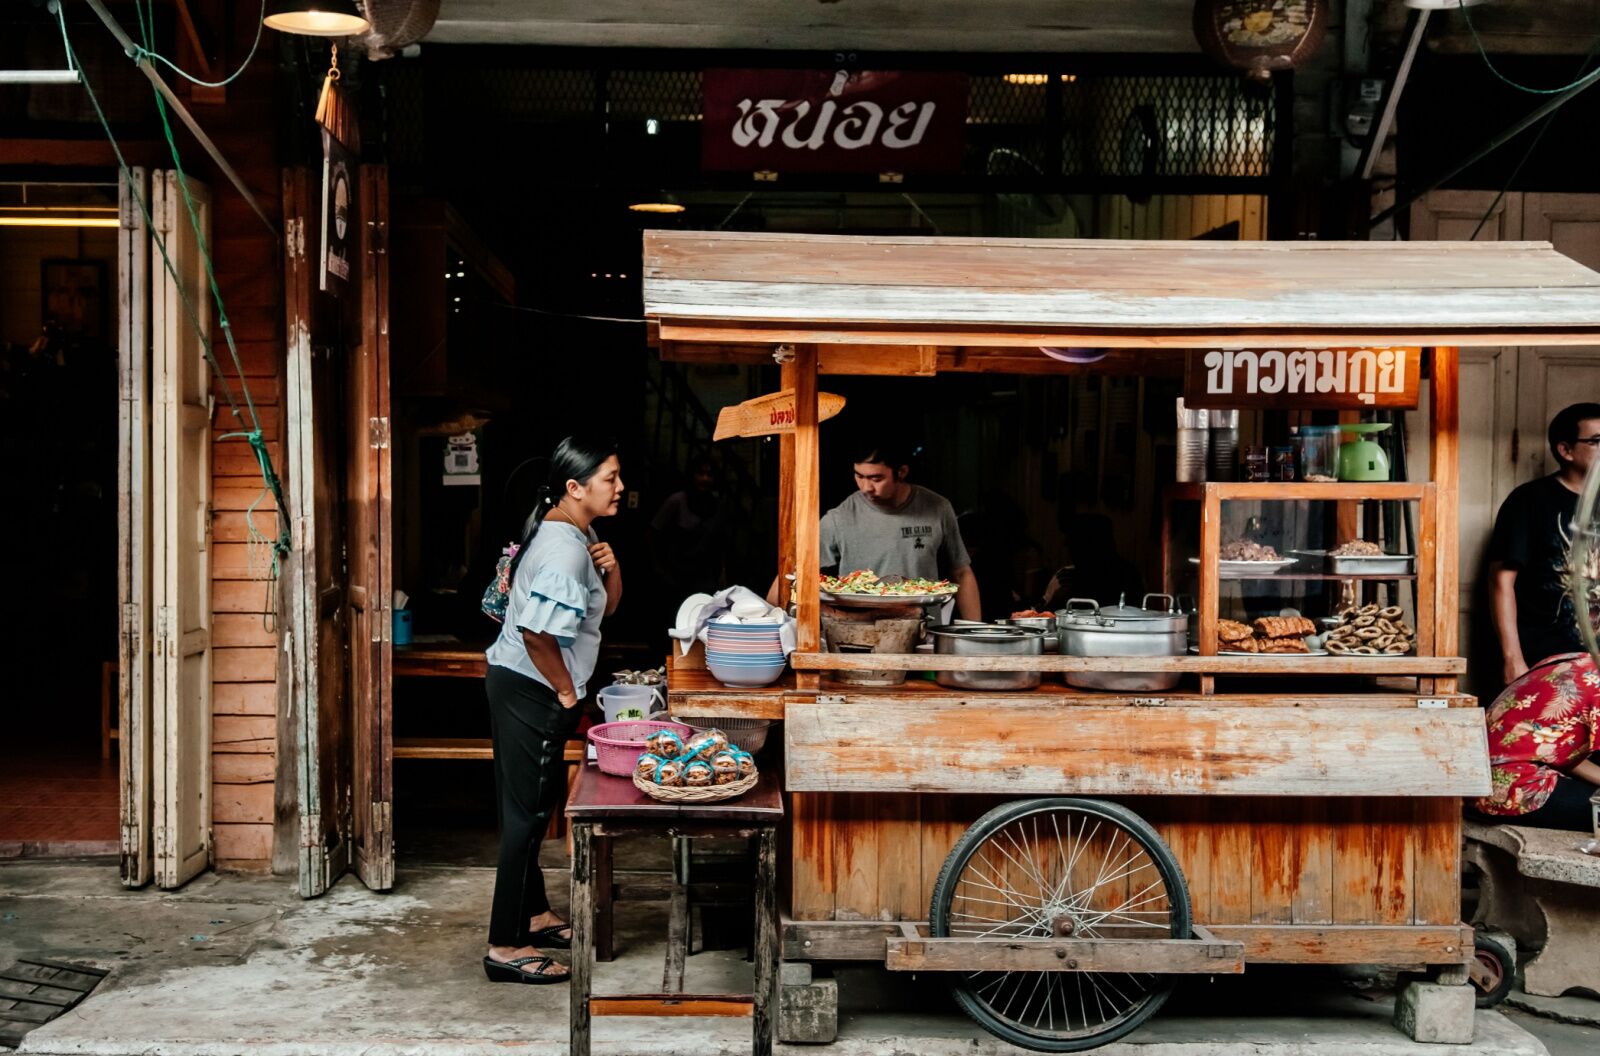 food cart on street in thailand